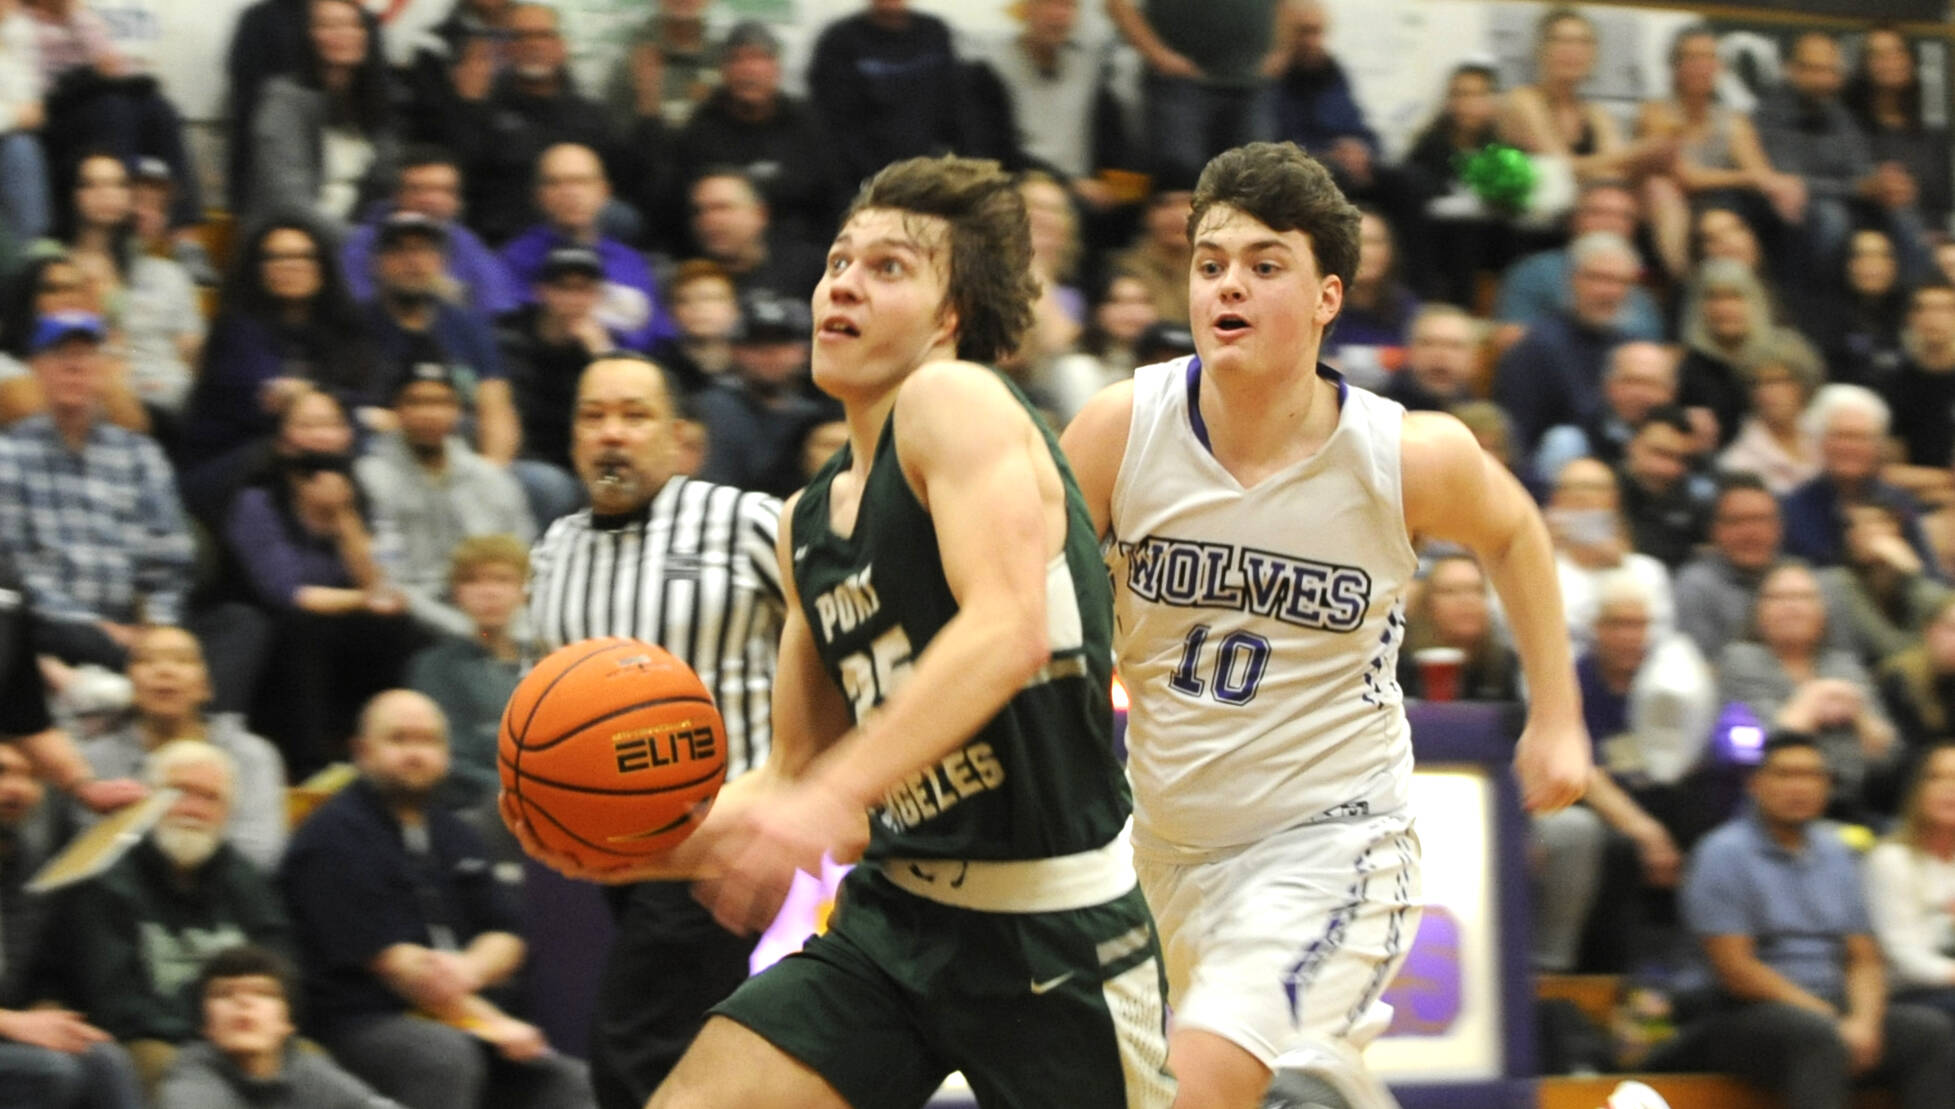 Michael Dashiell/Olympic Peninsula News Group
Port Angeles' Parker Nickerson eyes the rim on a breakaway while chased by Sequim's Keenan Greene. Nickerson is the 2022-23 All-Peninsula Boys Basketball MVP.